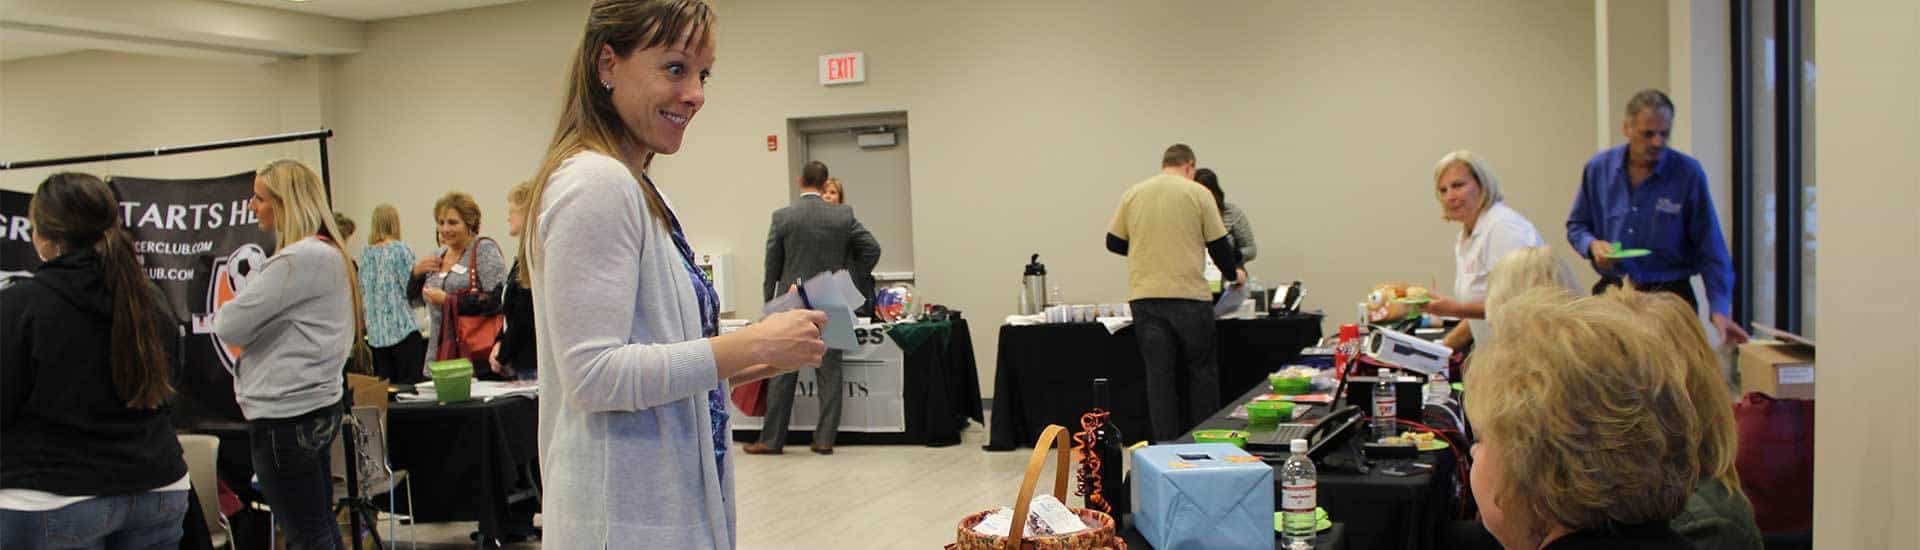 Grundy chamber opportunities booths